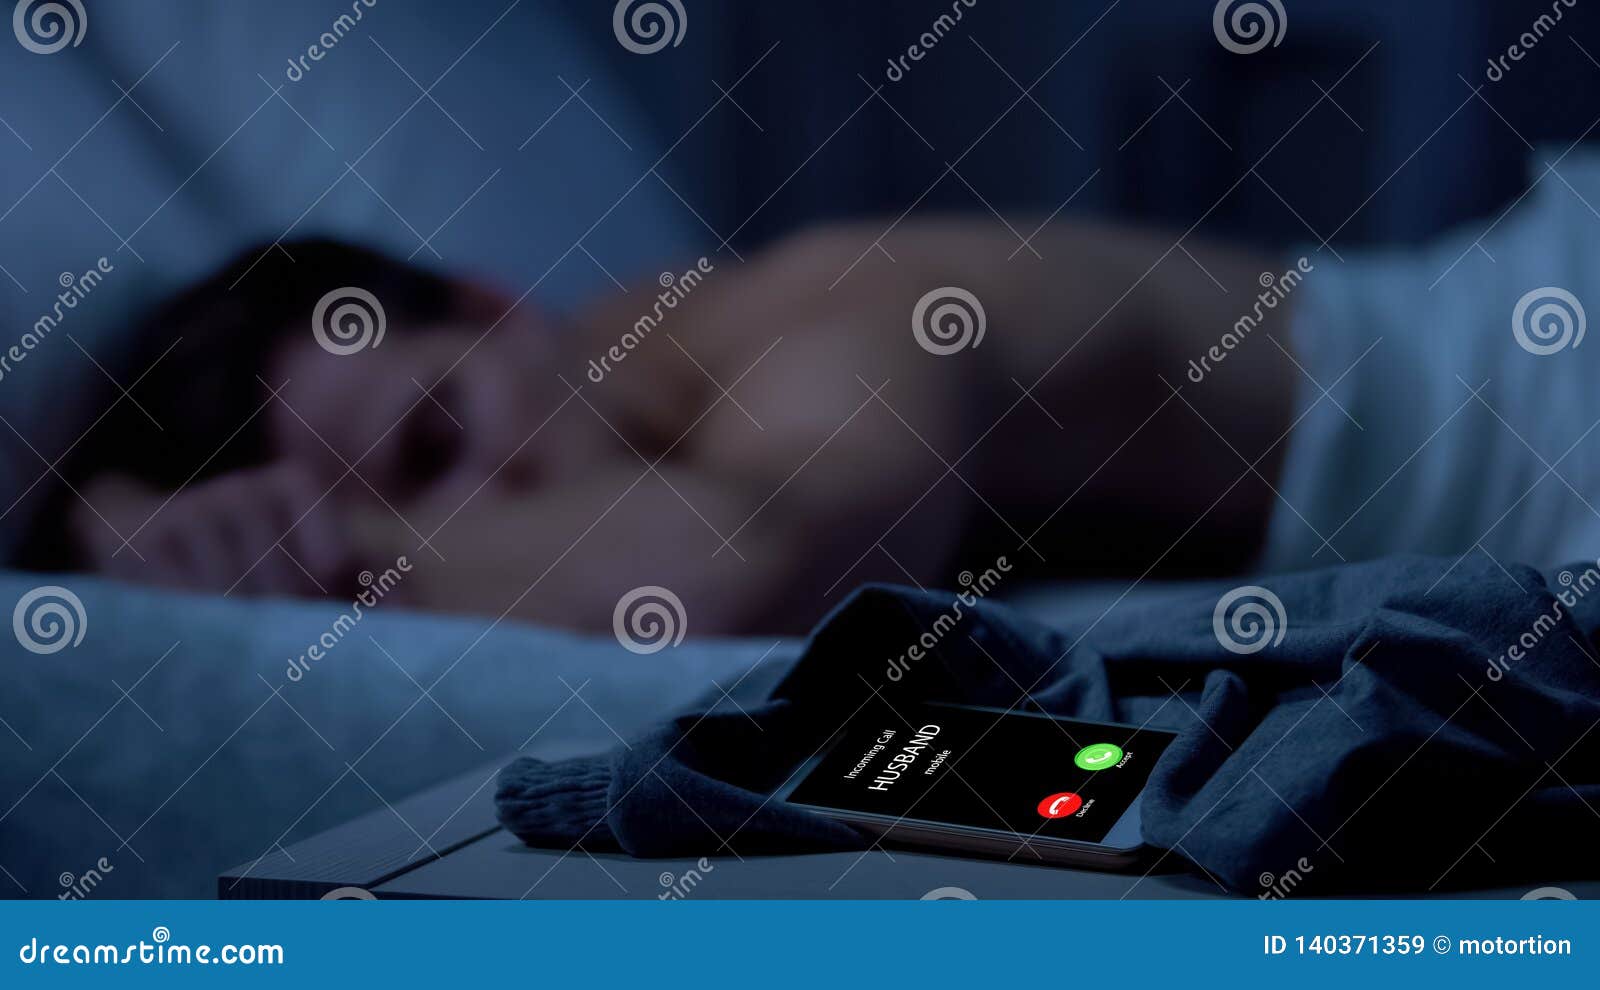 Husband Calling while Male Sleeping Deeply, Missing Call, Same-sex Relations Stock Image pic image